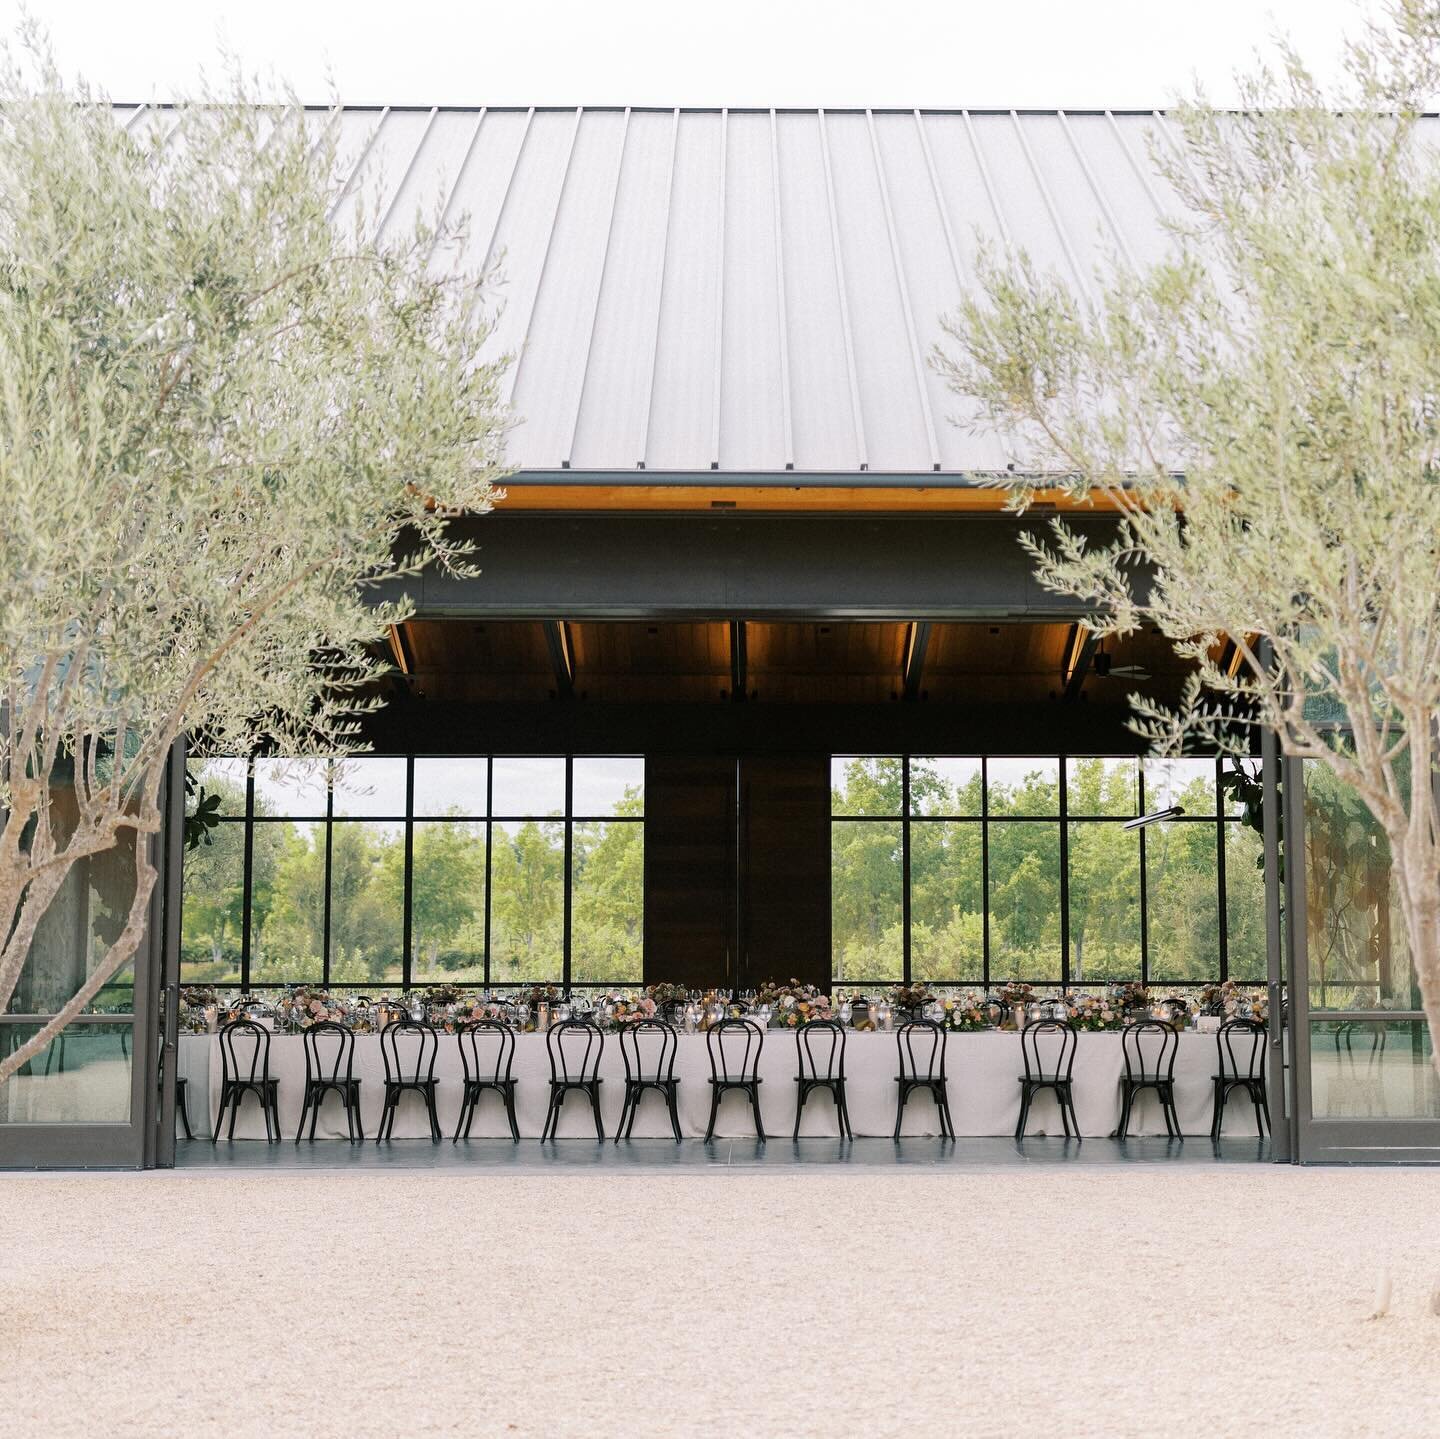 When a reception is this inviting, you can&rsquo;t wait to get inside and get the party started!
.
.
.
Photography: @katieshuler 
Planning &amp; Design: @eventoftheseason 
Floral Design: @solstice_bloom 
.
.
.
#solsticebloom #solsticebloomdesign #flo